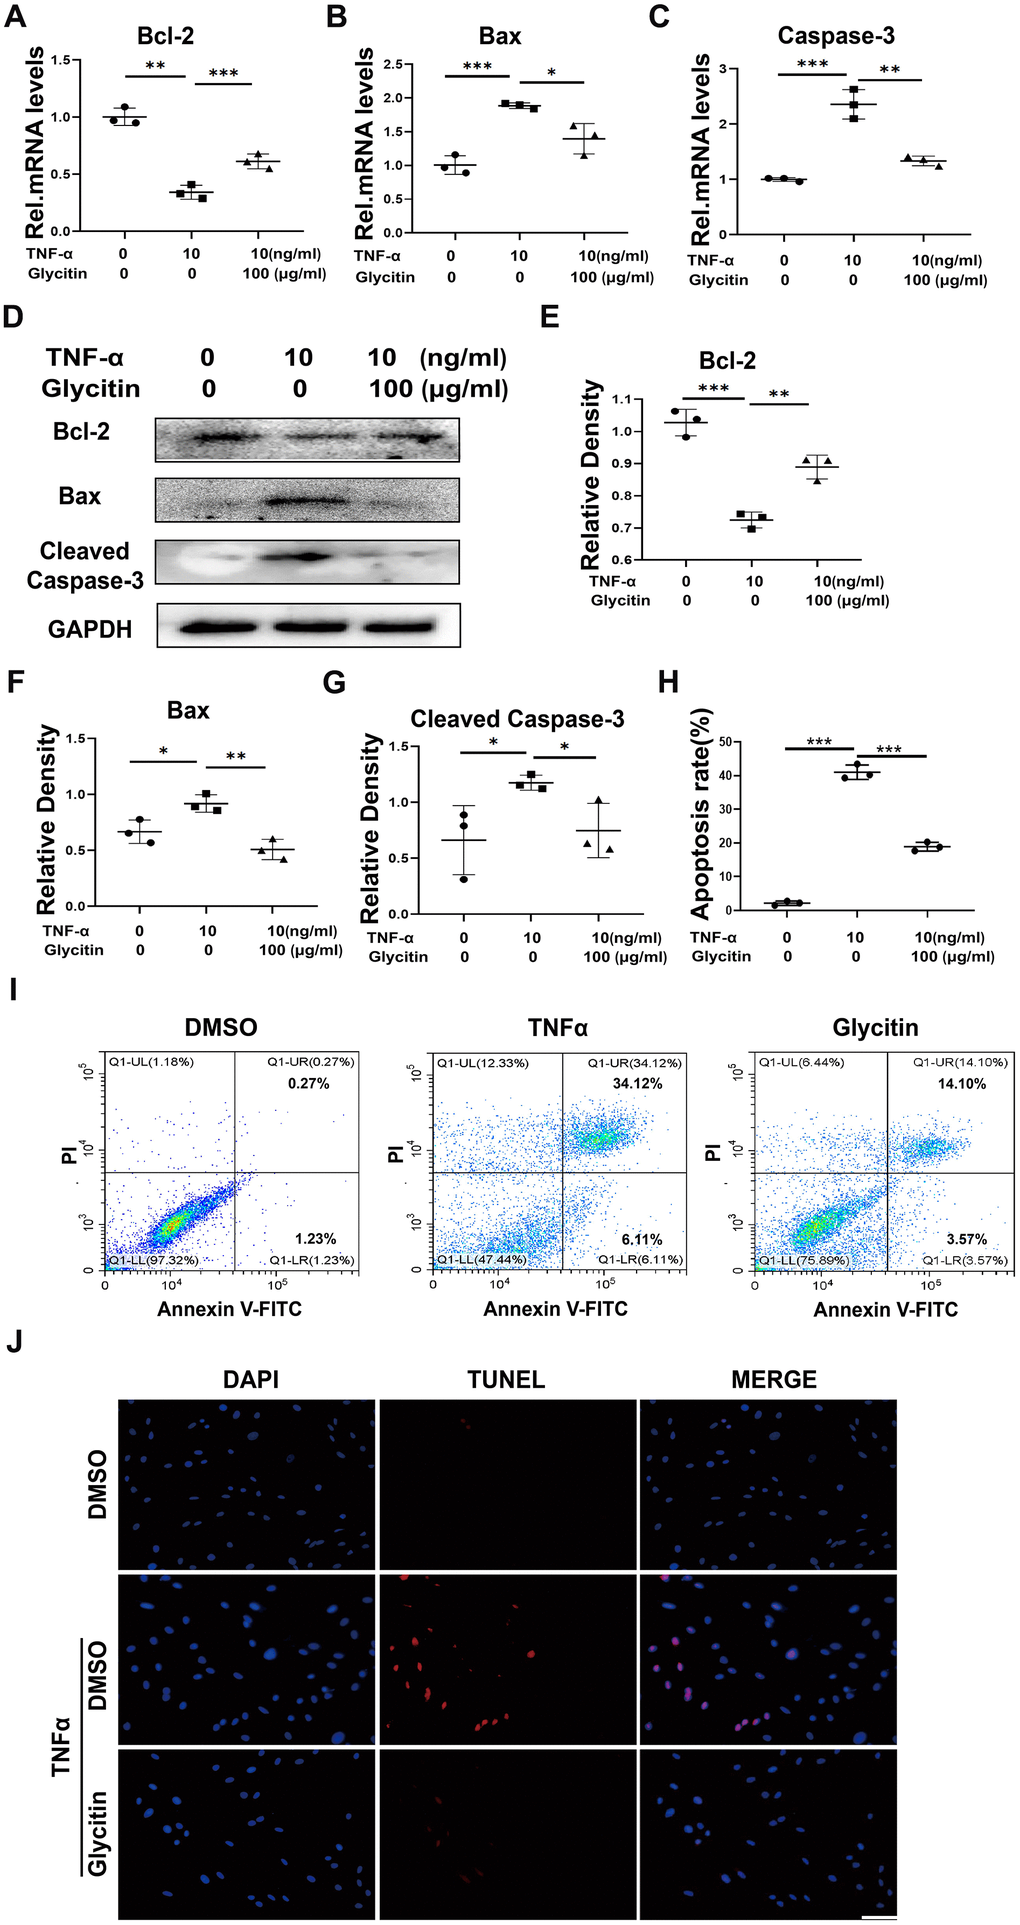 Glycitin alleviated the TNF-α-induced HNPCs apoptosis. (A–C) Transcriptional and (D) protein levels of Bcl-2, Bax and Cleaved Caspase-3 in human primary nucleus pulposus cells as determined by RT-PCR and WB method. (E–G) Quantitative analysis of immunoblotting in (D), assayed by ImageJ program. (H, I) Quantification of NP cell apoptosis by flow cytometry. (J) TUNEL staining of the human NP cells of every group (n=3). Nuclei were stained with DAPI. Scale bar, 100 μm. The values shown represent the mean ± SD of three independent experiments. *p 